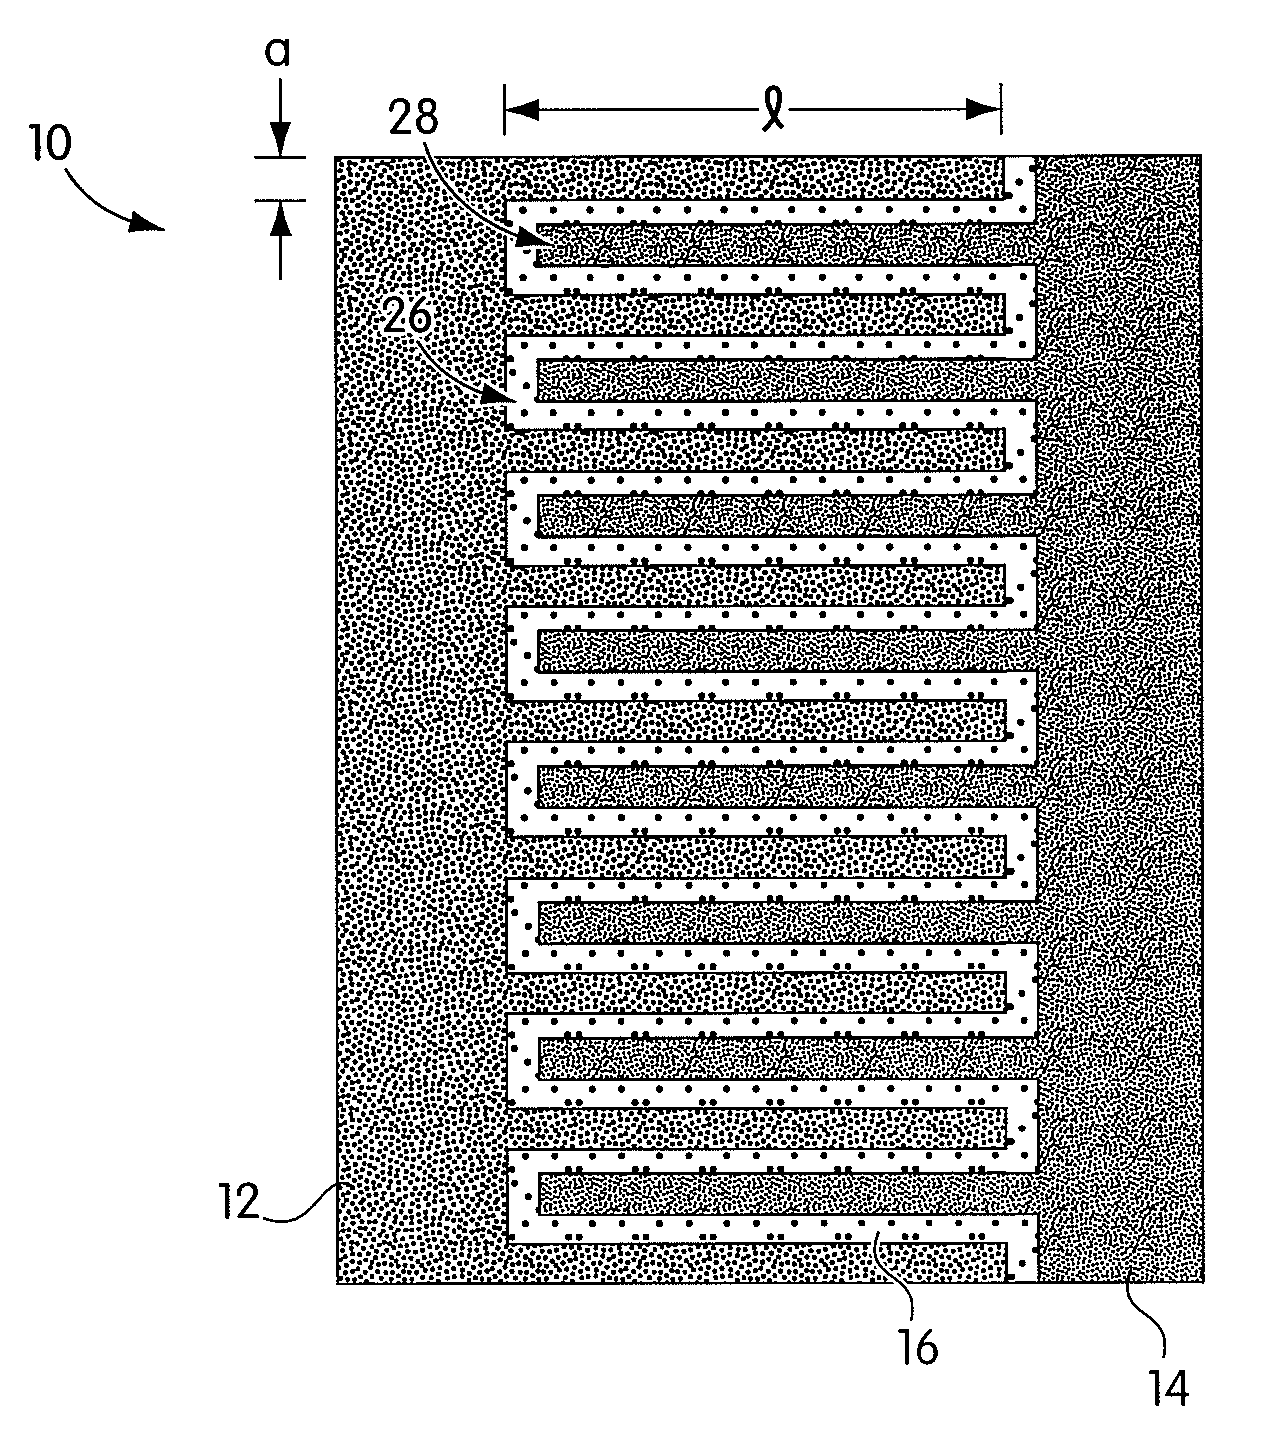 Reticulated and controlled porosity battery structures